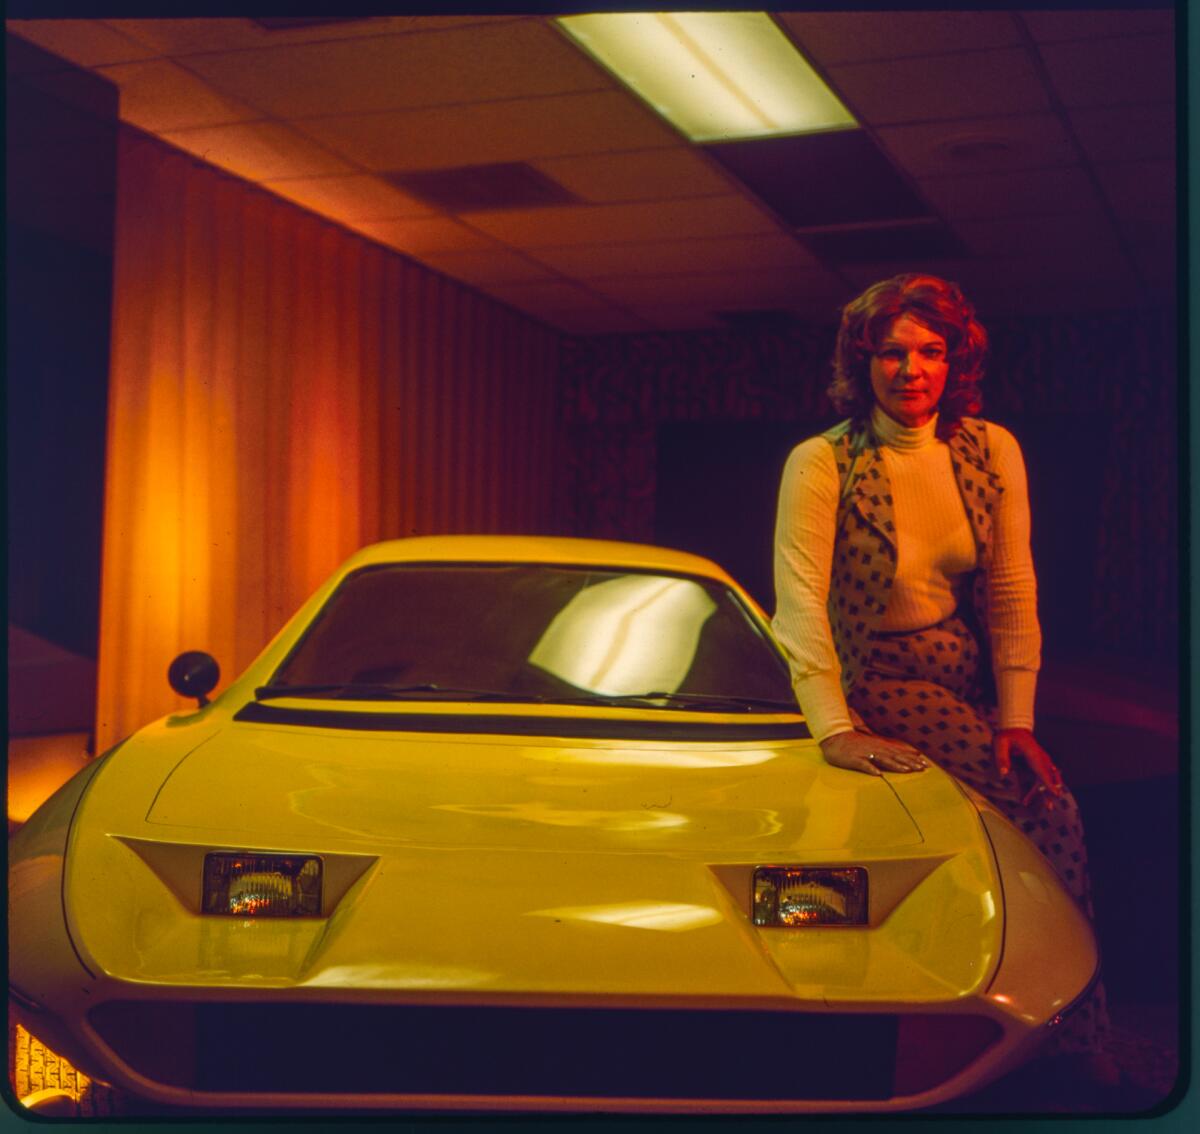 Elizabeth Carmichael leaning on a bright yellow model of her Dale automobile